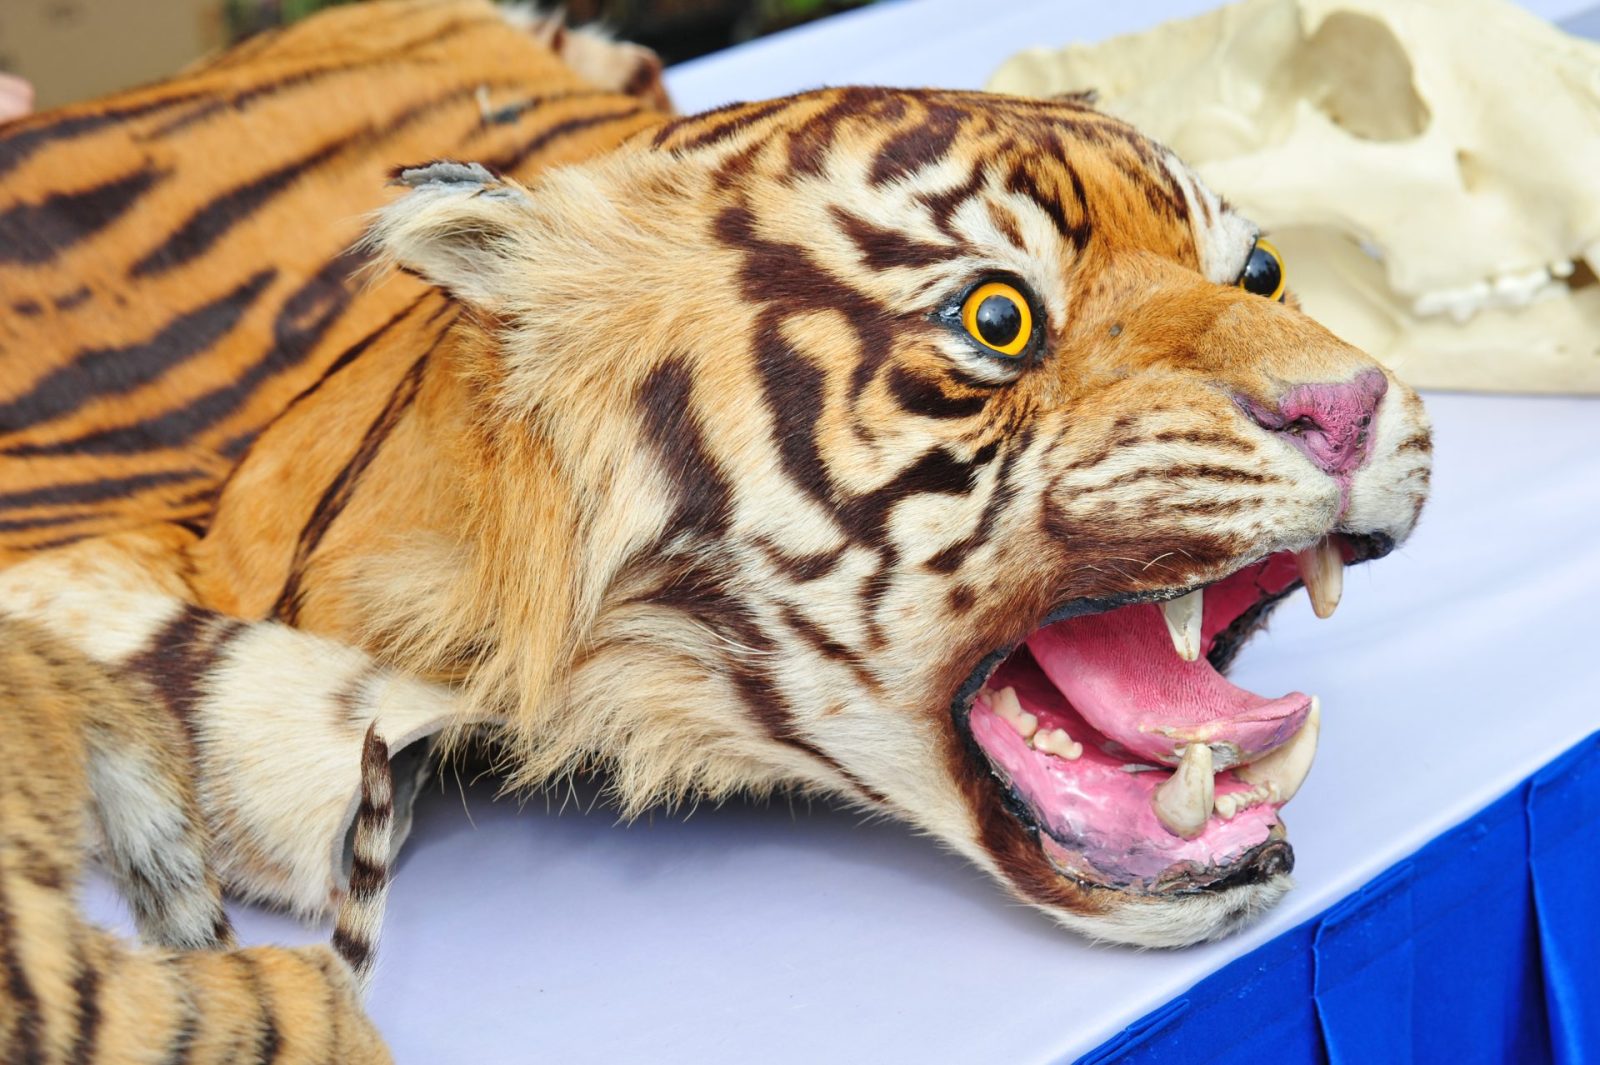 Brooklyn Man Pleads Guilty to Selling Illegal Exotic Animal Parts – One Green Planet